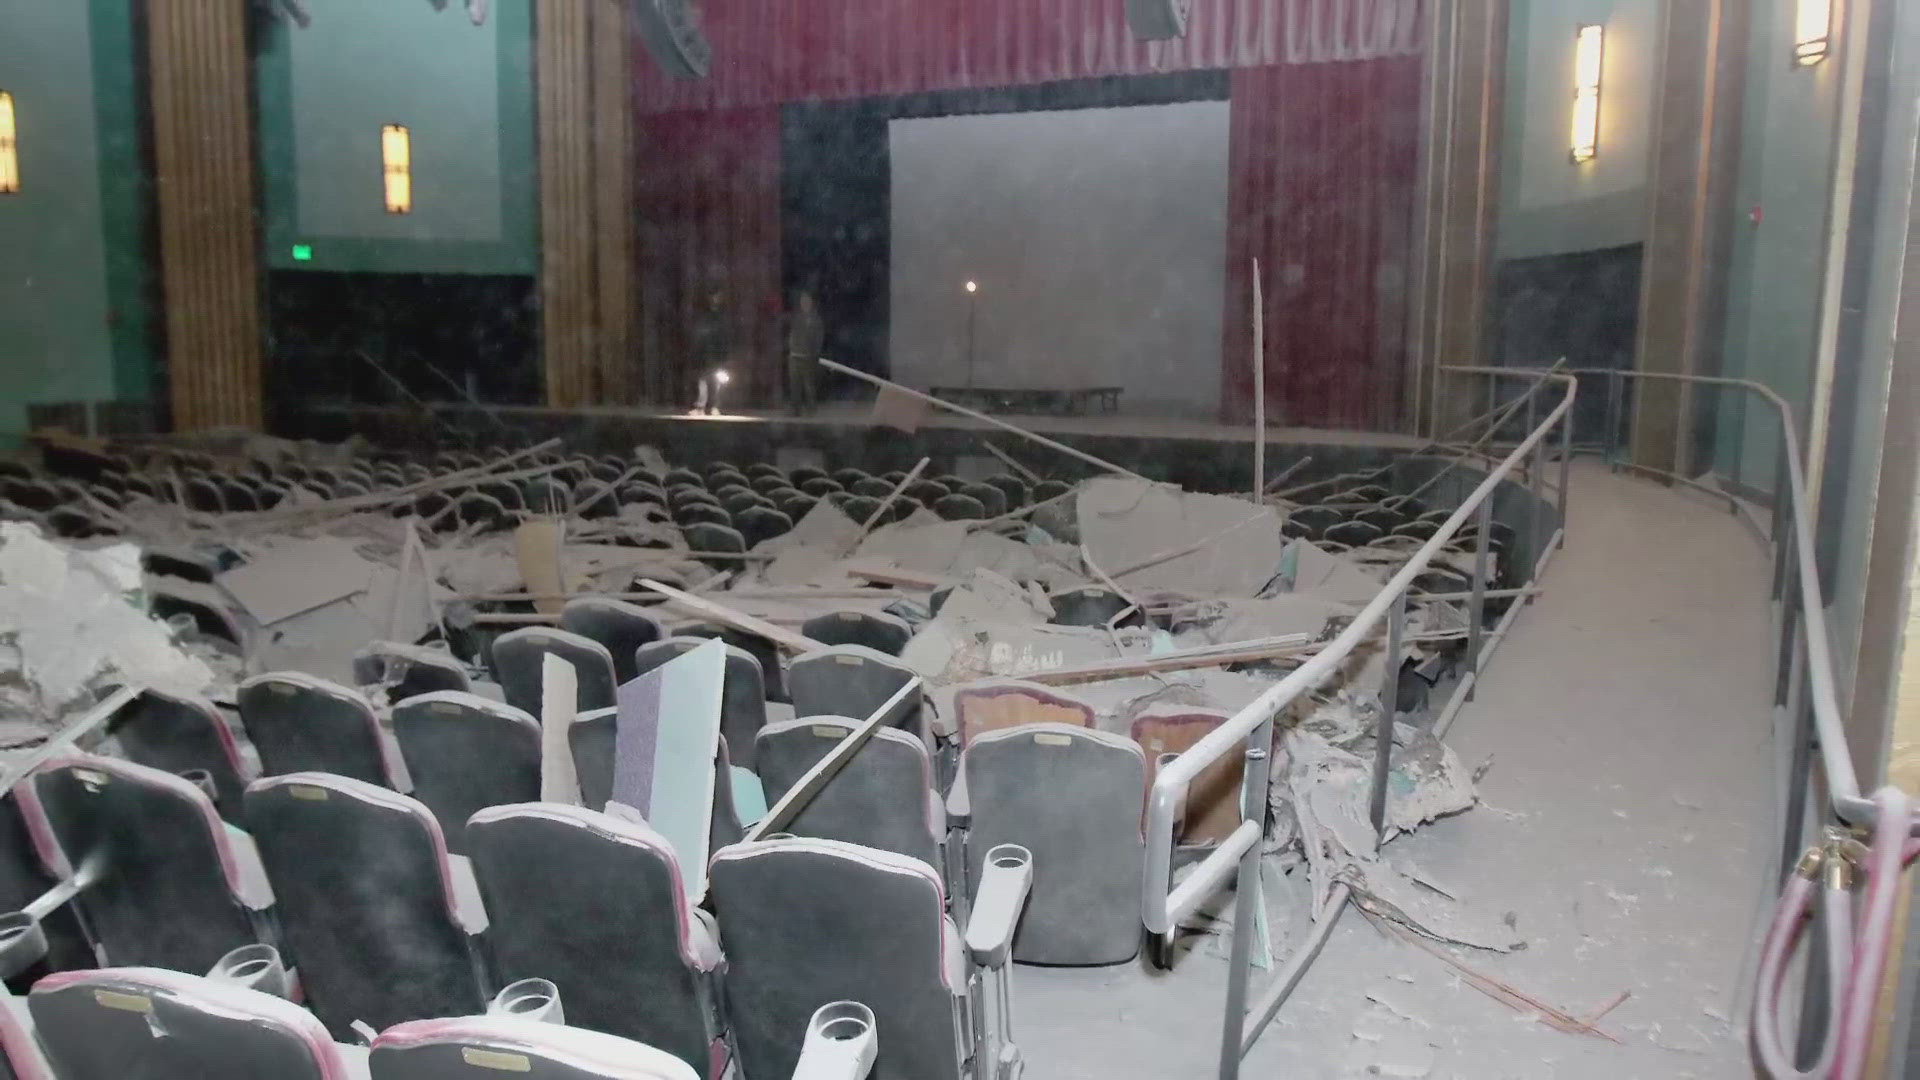 Auburn State Theatre is holding a fundraiser for repairs after the ceiling collapsed.